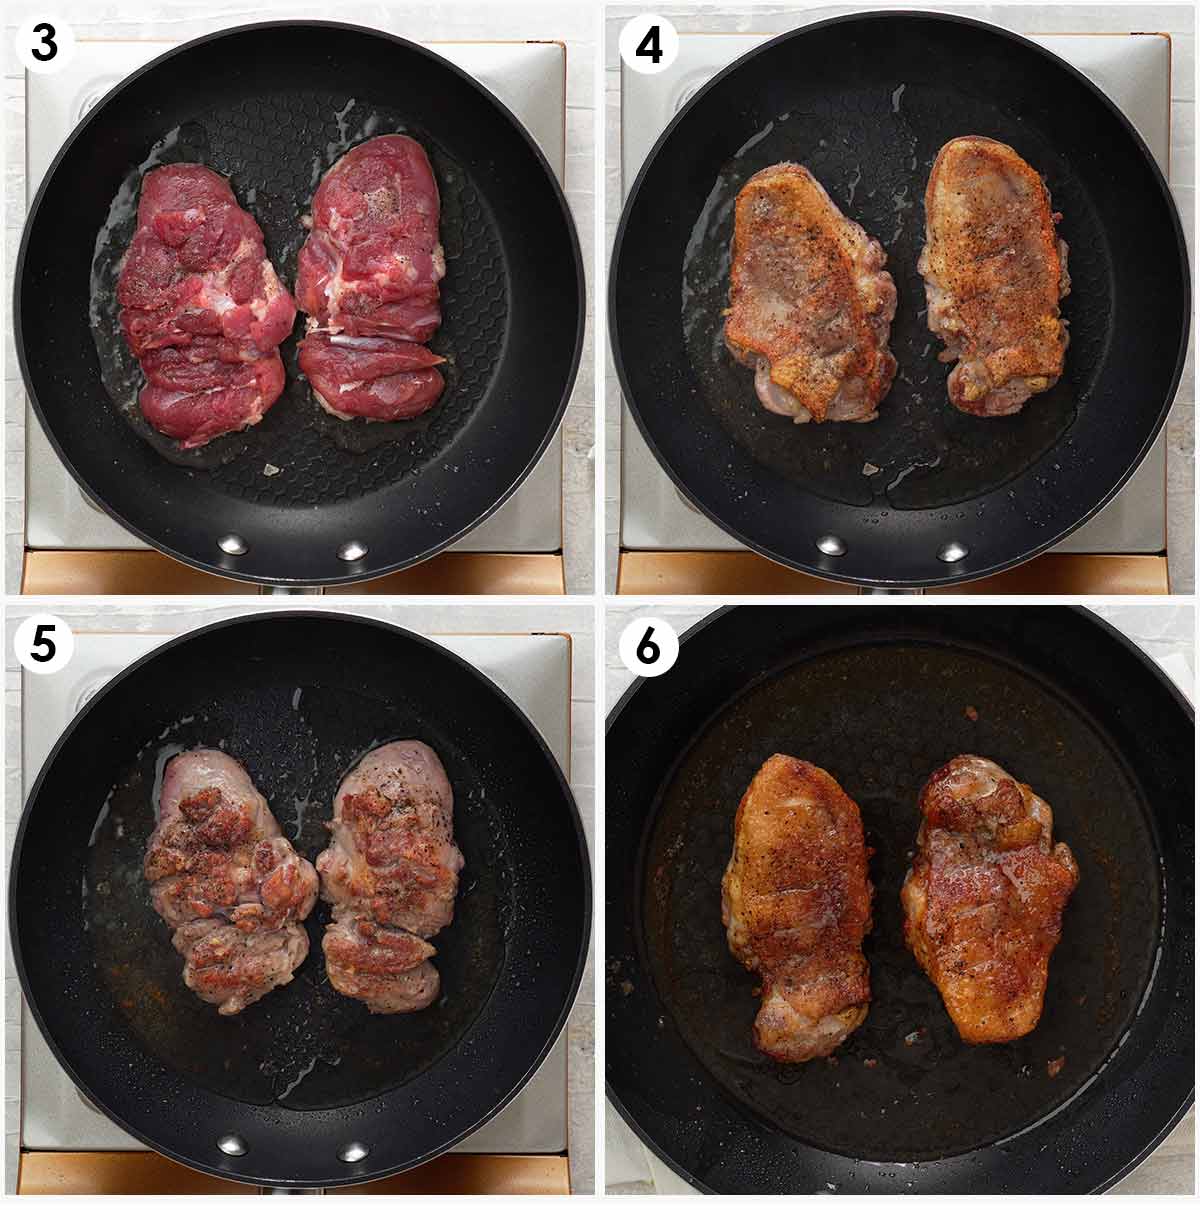 Four image collage showing how to cook the duck thigh.